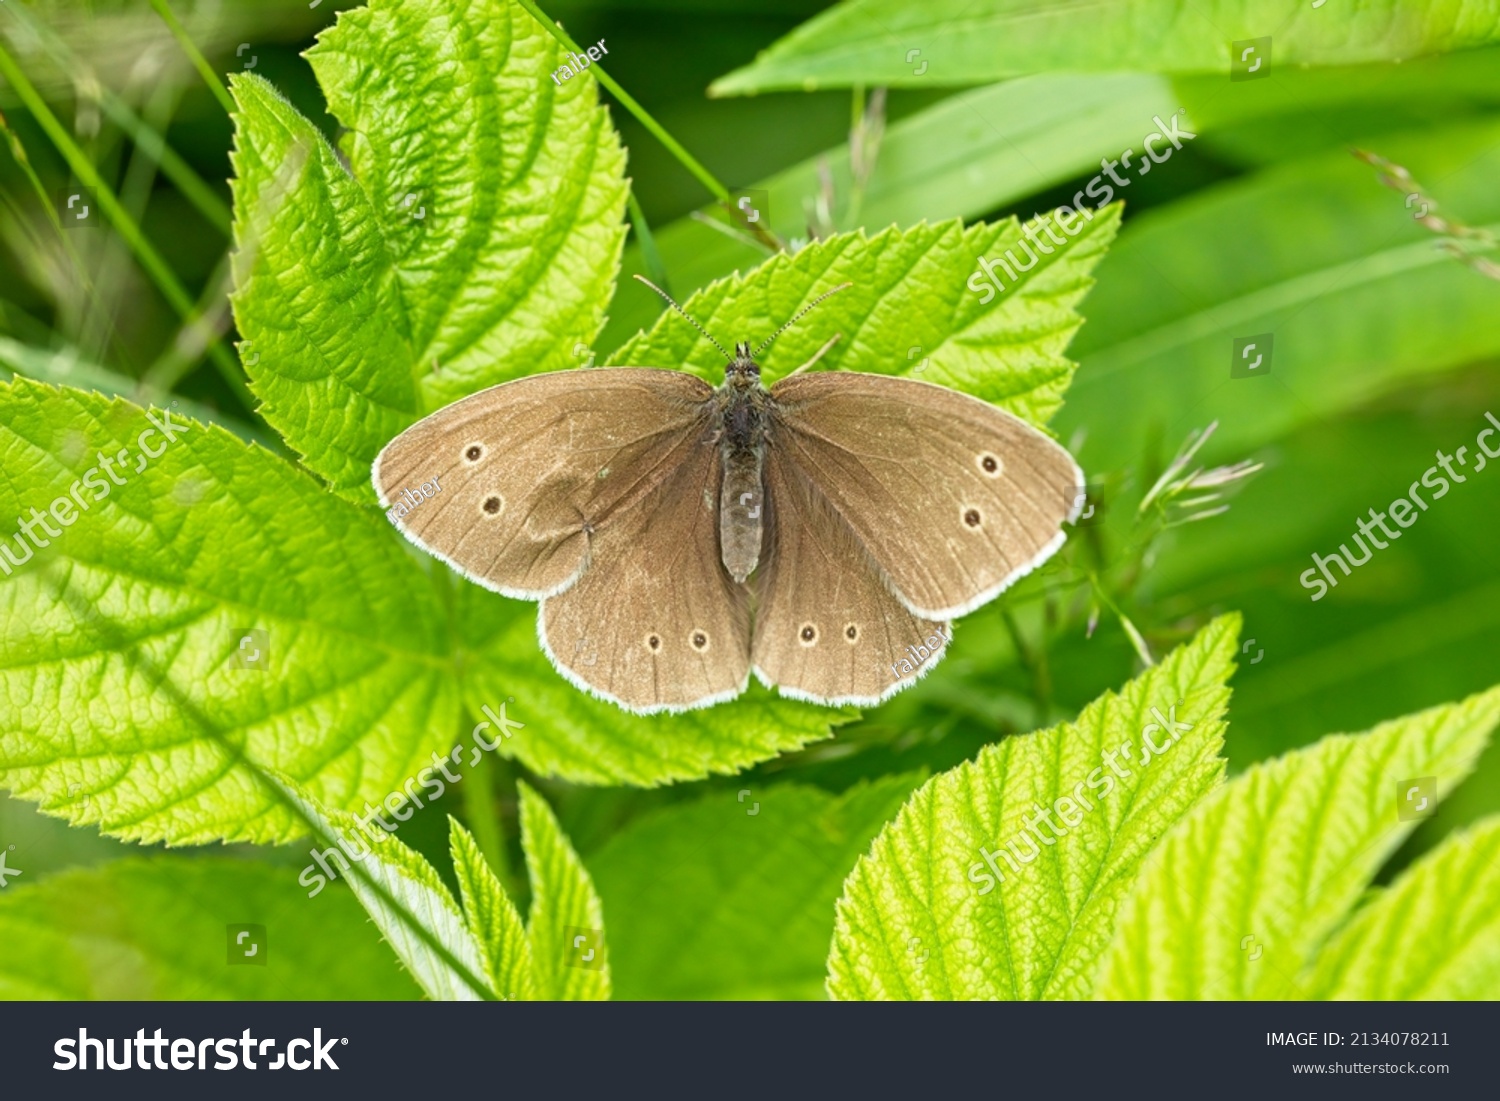  Ringlet butterfly on a green leaf. #2134078211